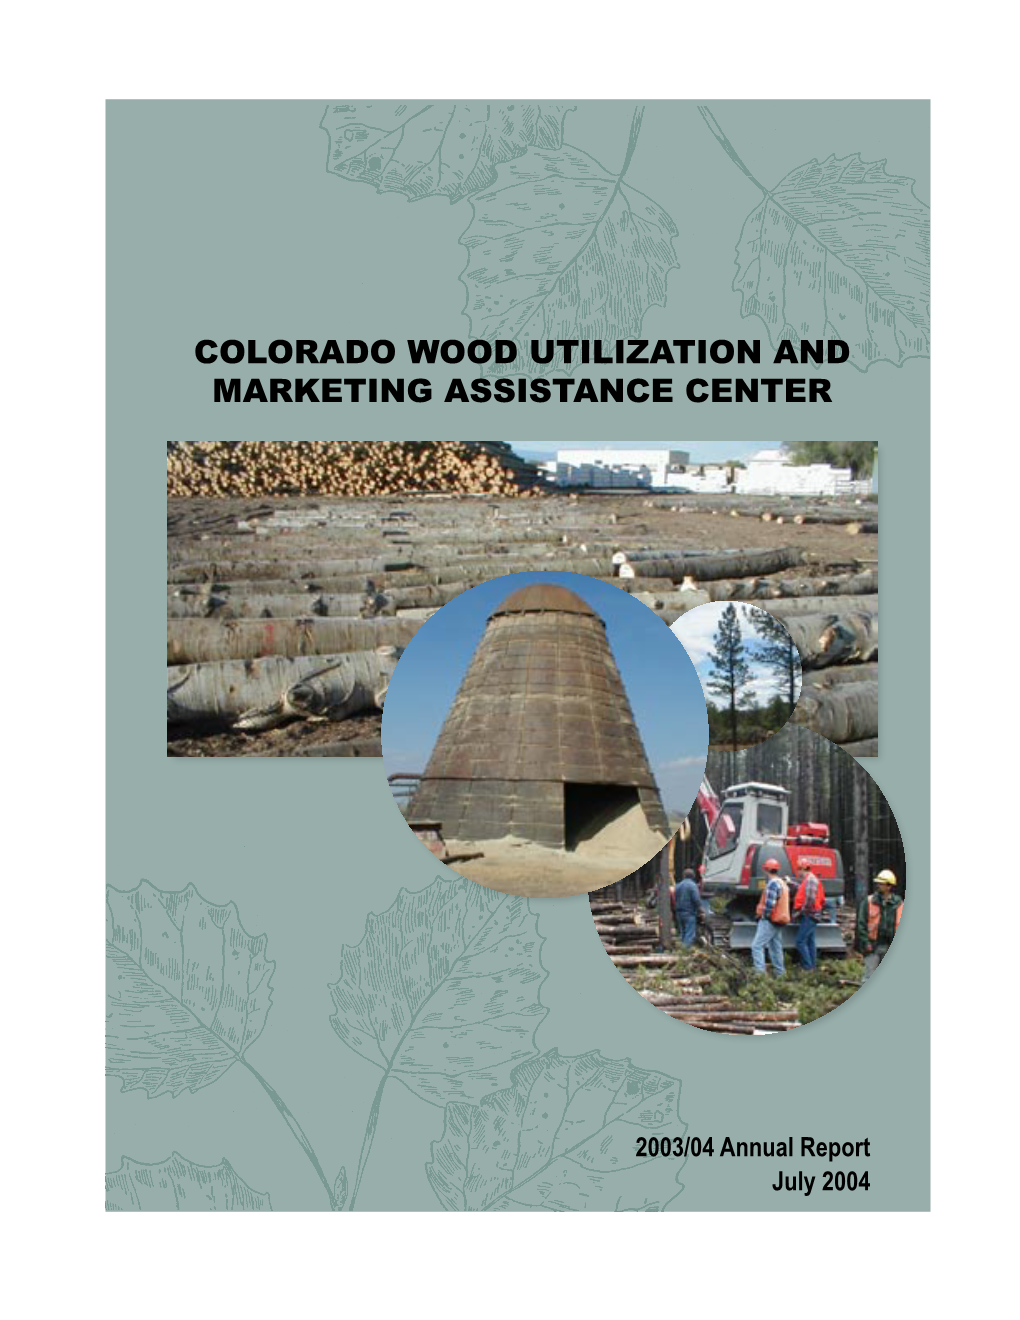 Colorado Wood Utilization and Marketing Assistance Center